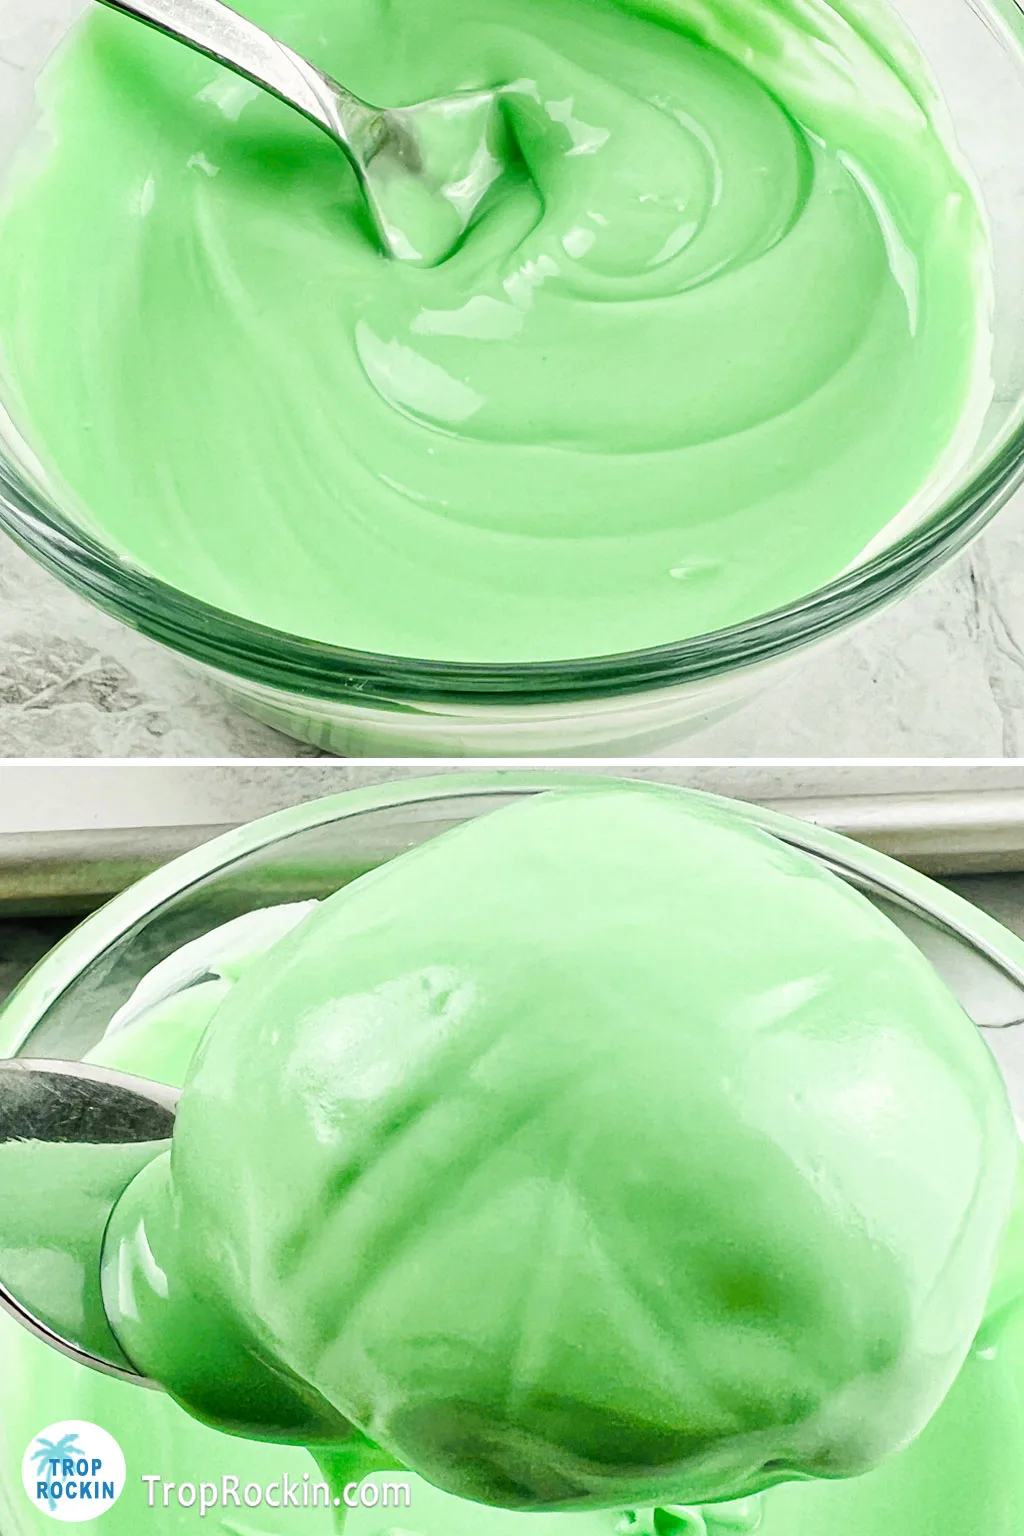 Top photo melted white chocolate turned green with food coloring and bottom photo using a fork to dip an oreo cookie ball into the green melted chocolate.